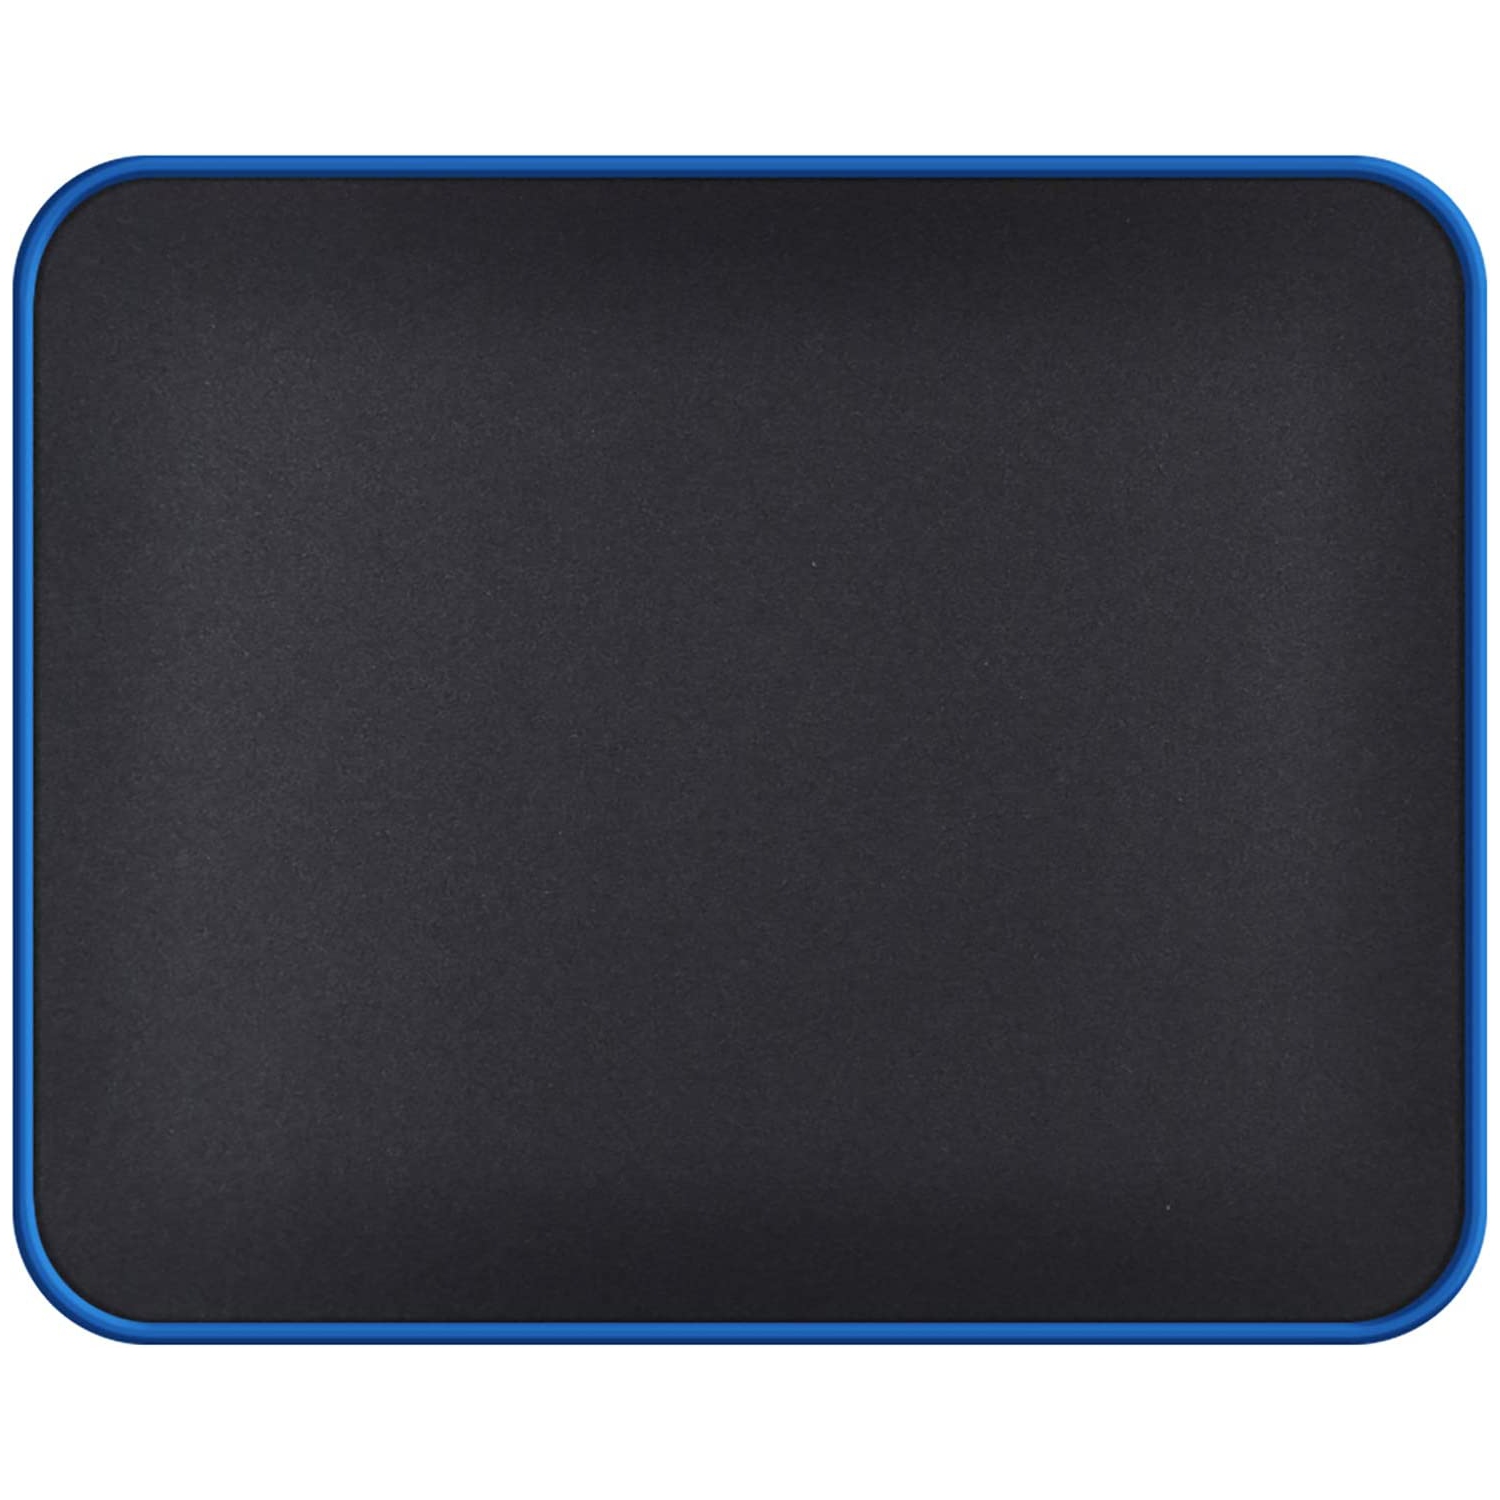 Mouse Pad (4mm Thick) with Blue Non Slip Rubber Base, Small Black Gaming Mouse Pads Mat with Smooth Surface, Durable Stitched Edge Mousepad for Laptop, Computer, Home(10.2x8.3x0.16